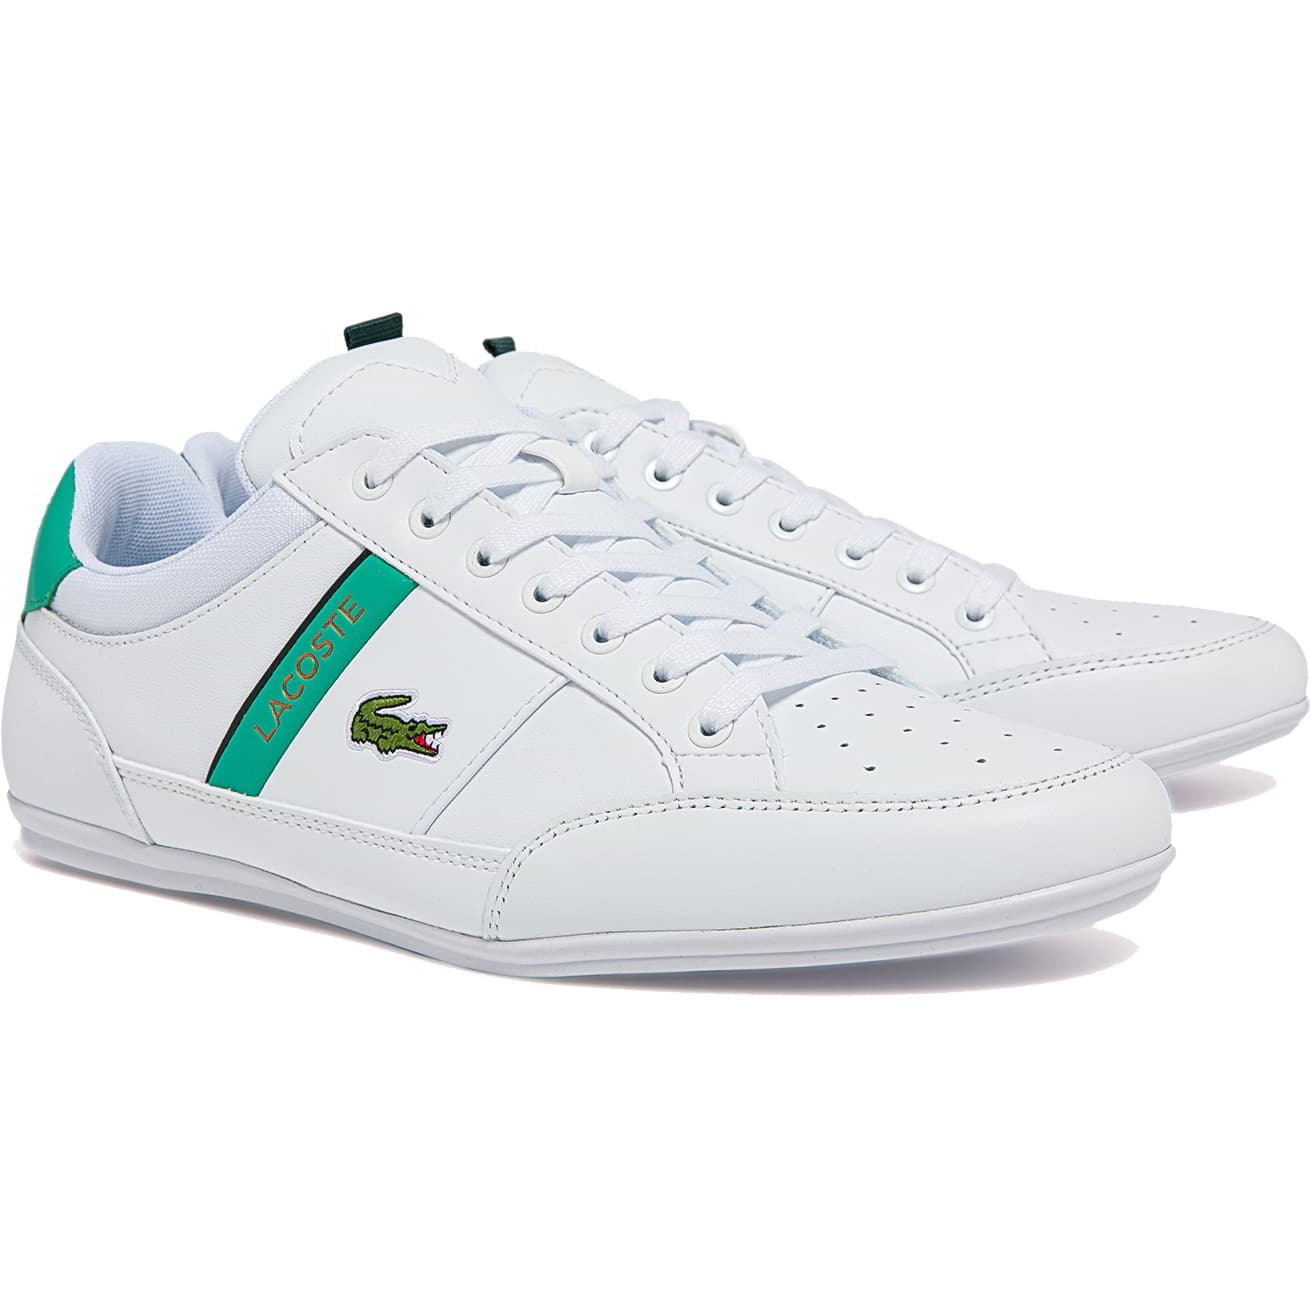 Lacoste Mens Chaymon 722-1 Leather Trainers - UK 10.5 White 2951